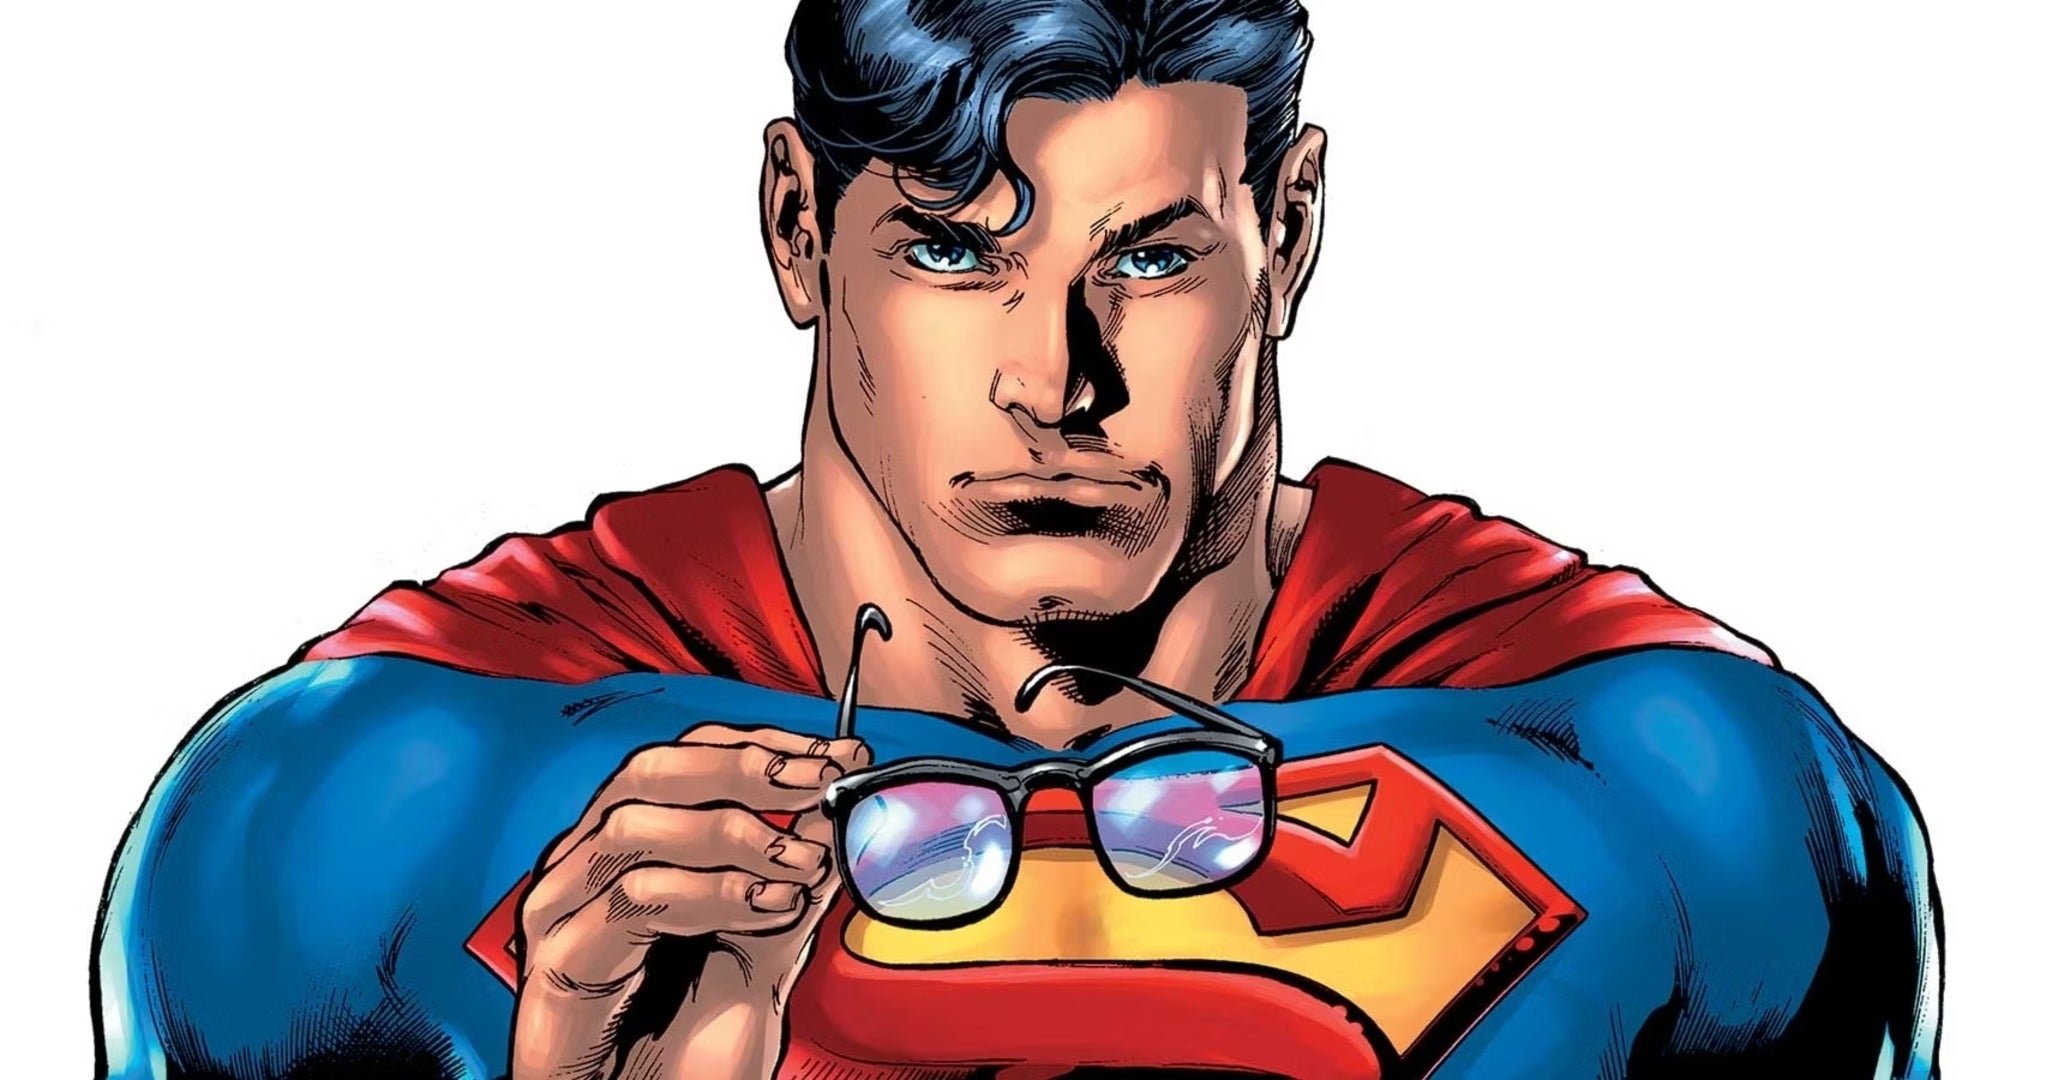 Image of Superman holding his Clark Kent glasses